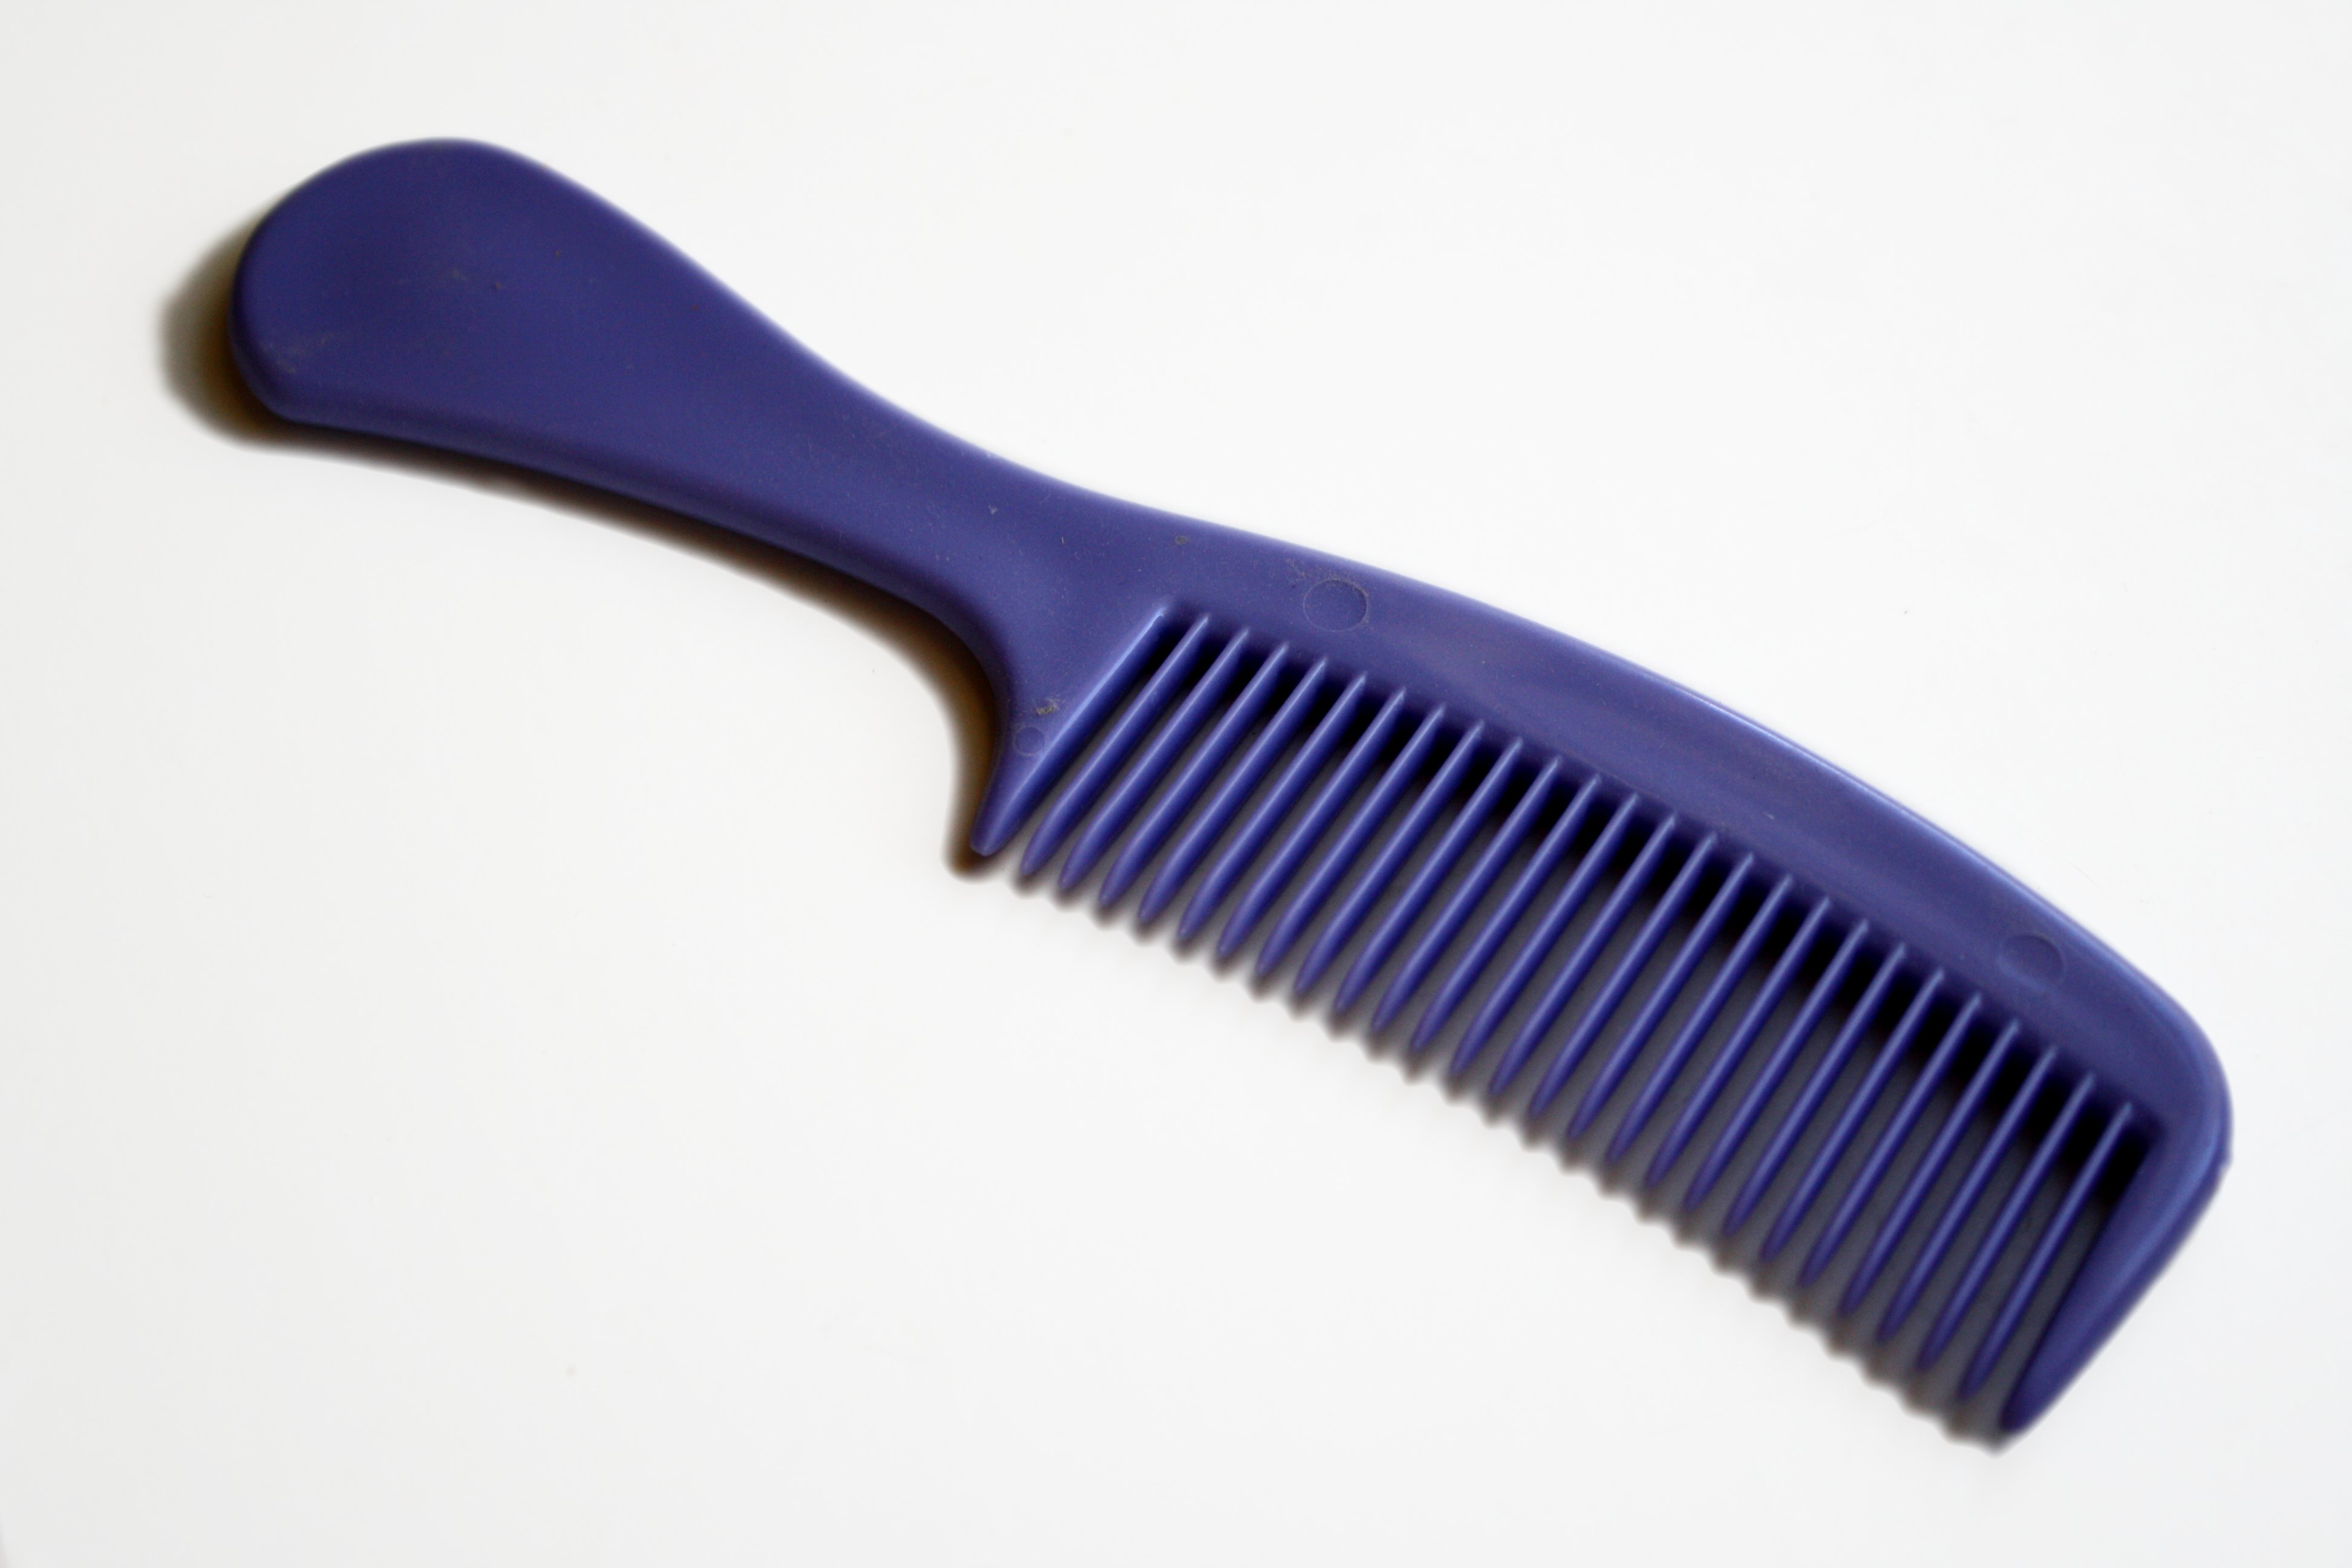 Purple Plastic Comb With Handle Picture   Free Photograph   Photos